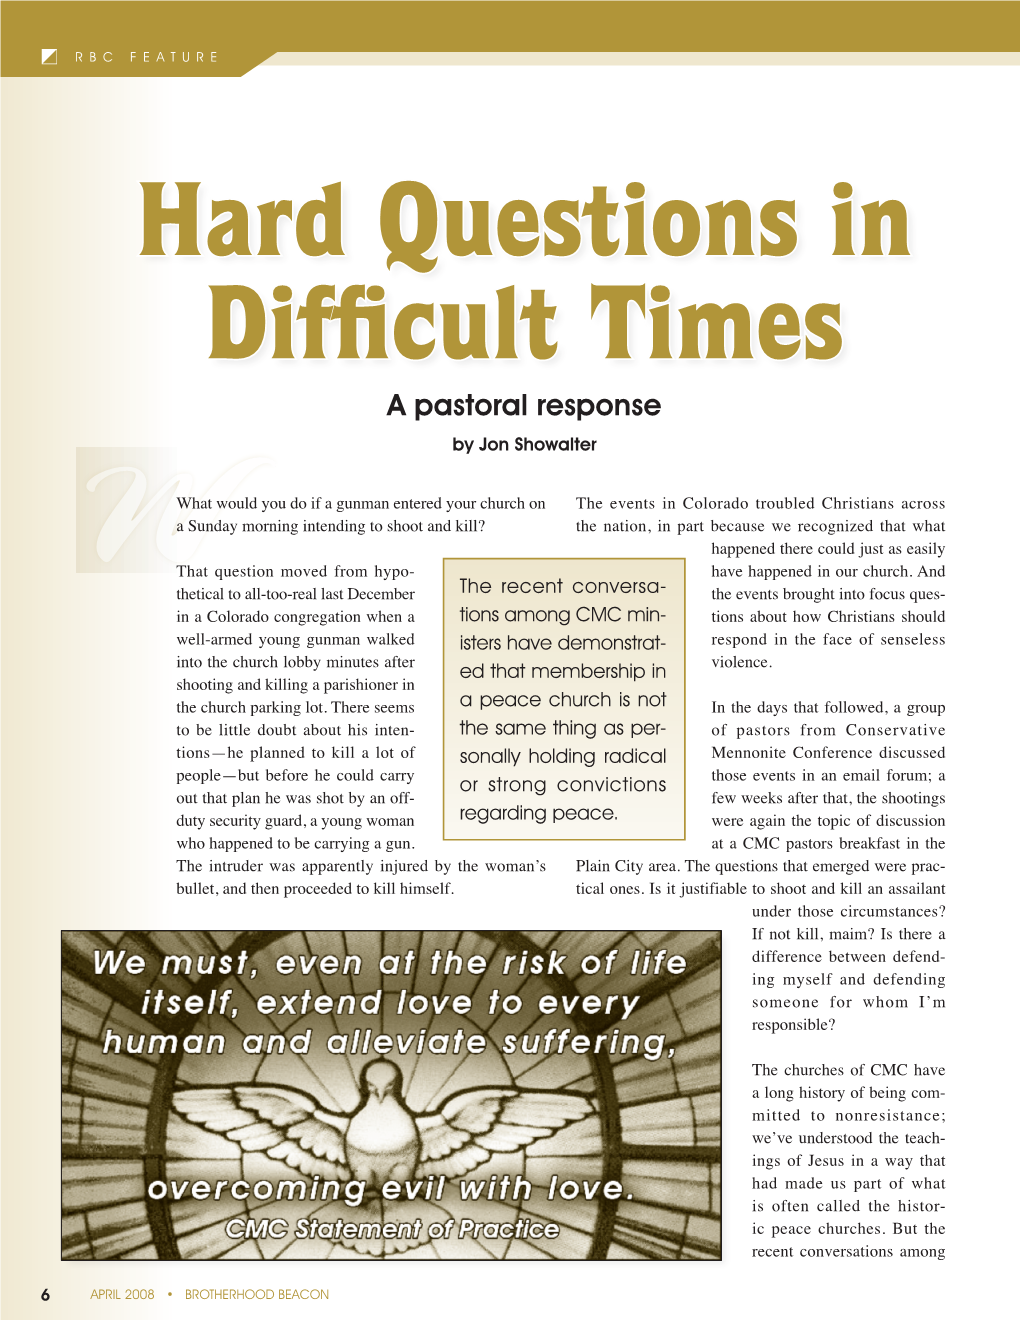 Hard Questions in Difficult Times a Pastoral Response by Jon Showalter